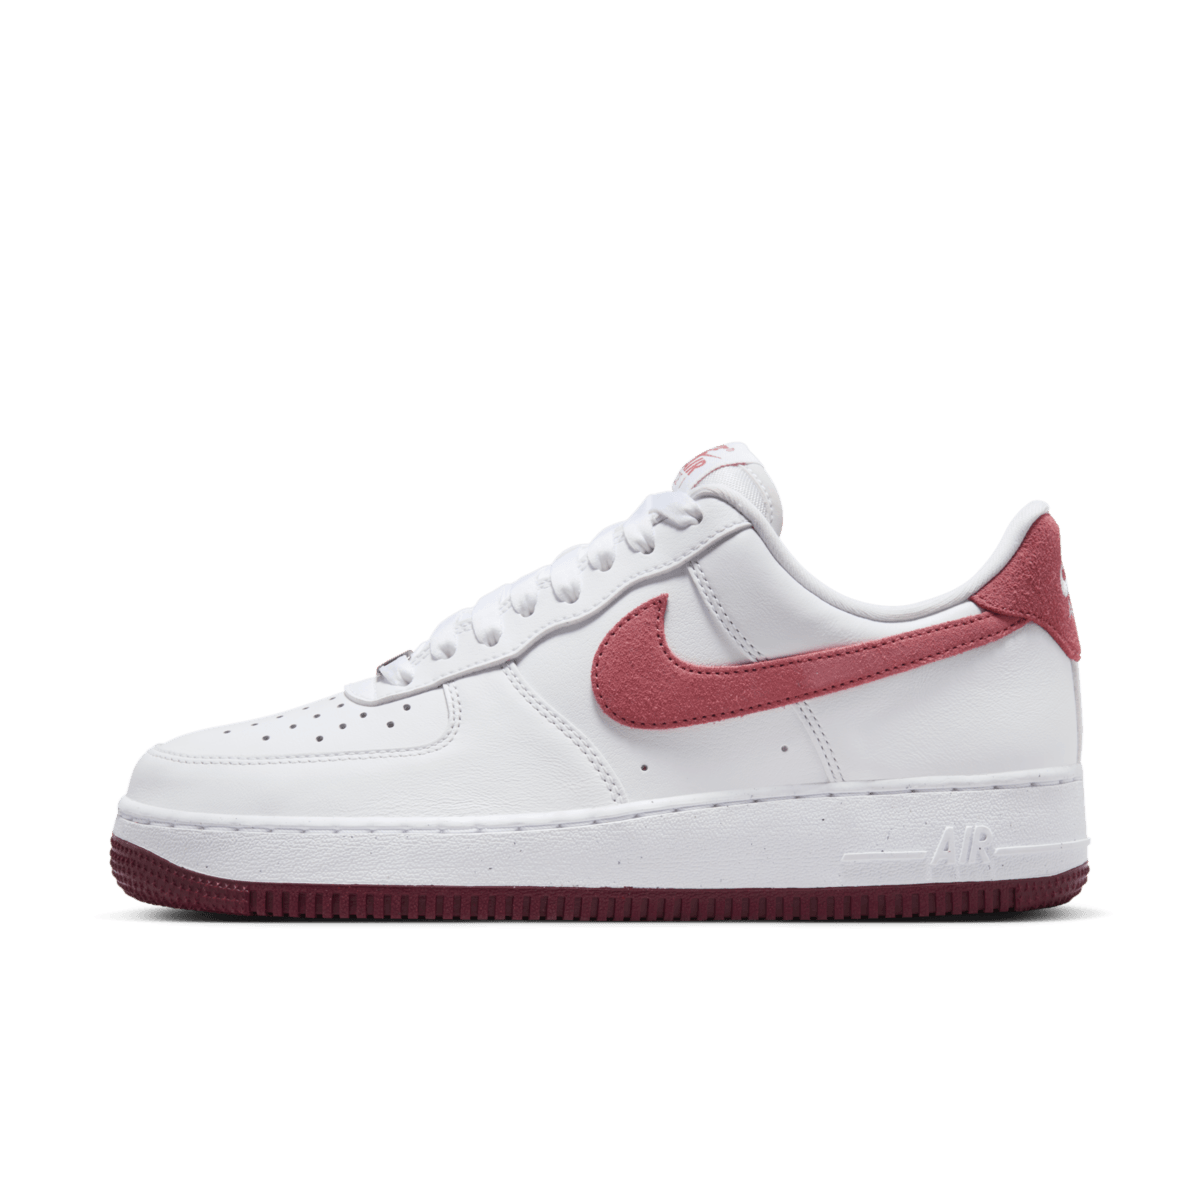 Nike Air Force 1 Low 'Adobe' - Valentine's Day